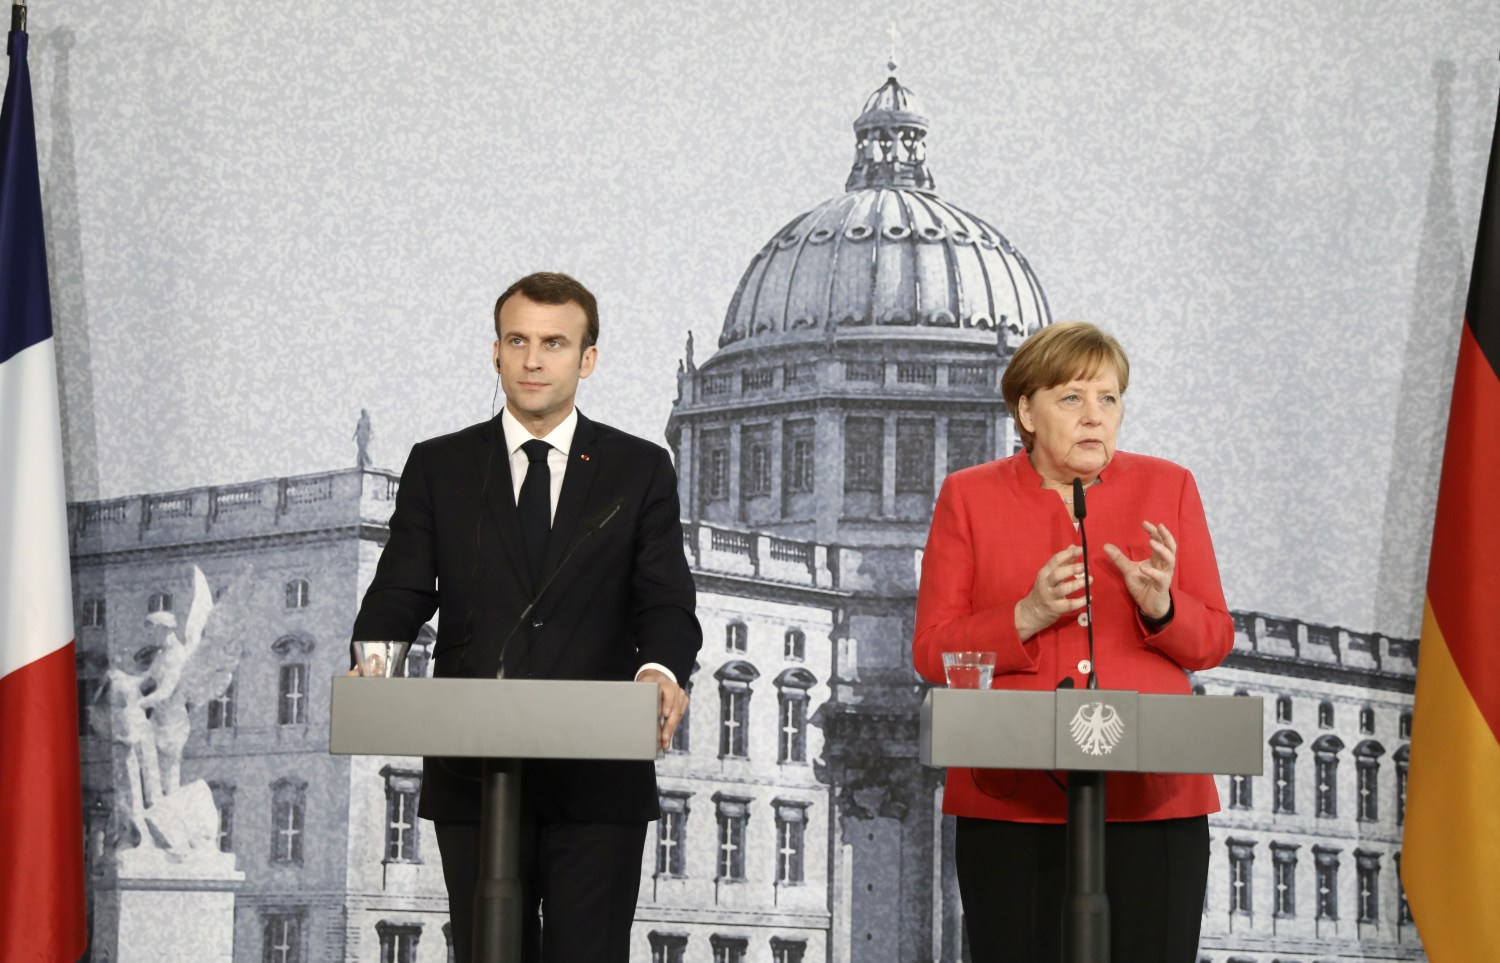 German Chancellor Angela Merkel and French President Emmanuel Macron hold a news conference at the building site of the Humboldt Forum in Berlin, Germany, April 19, 2018. Kay Nietfeld/Pool via Reuters - RC1A6FA5ADC0